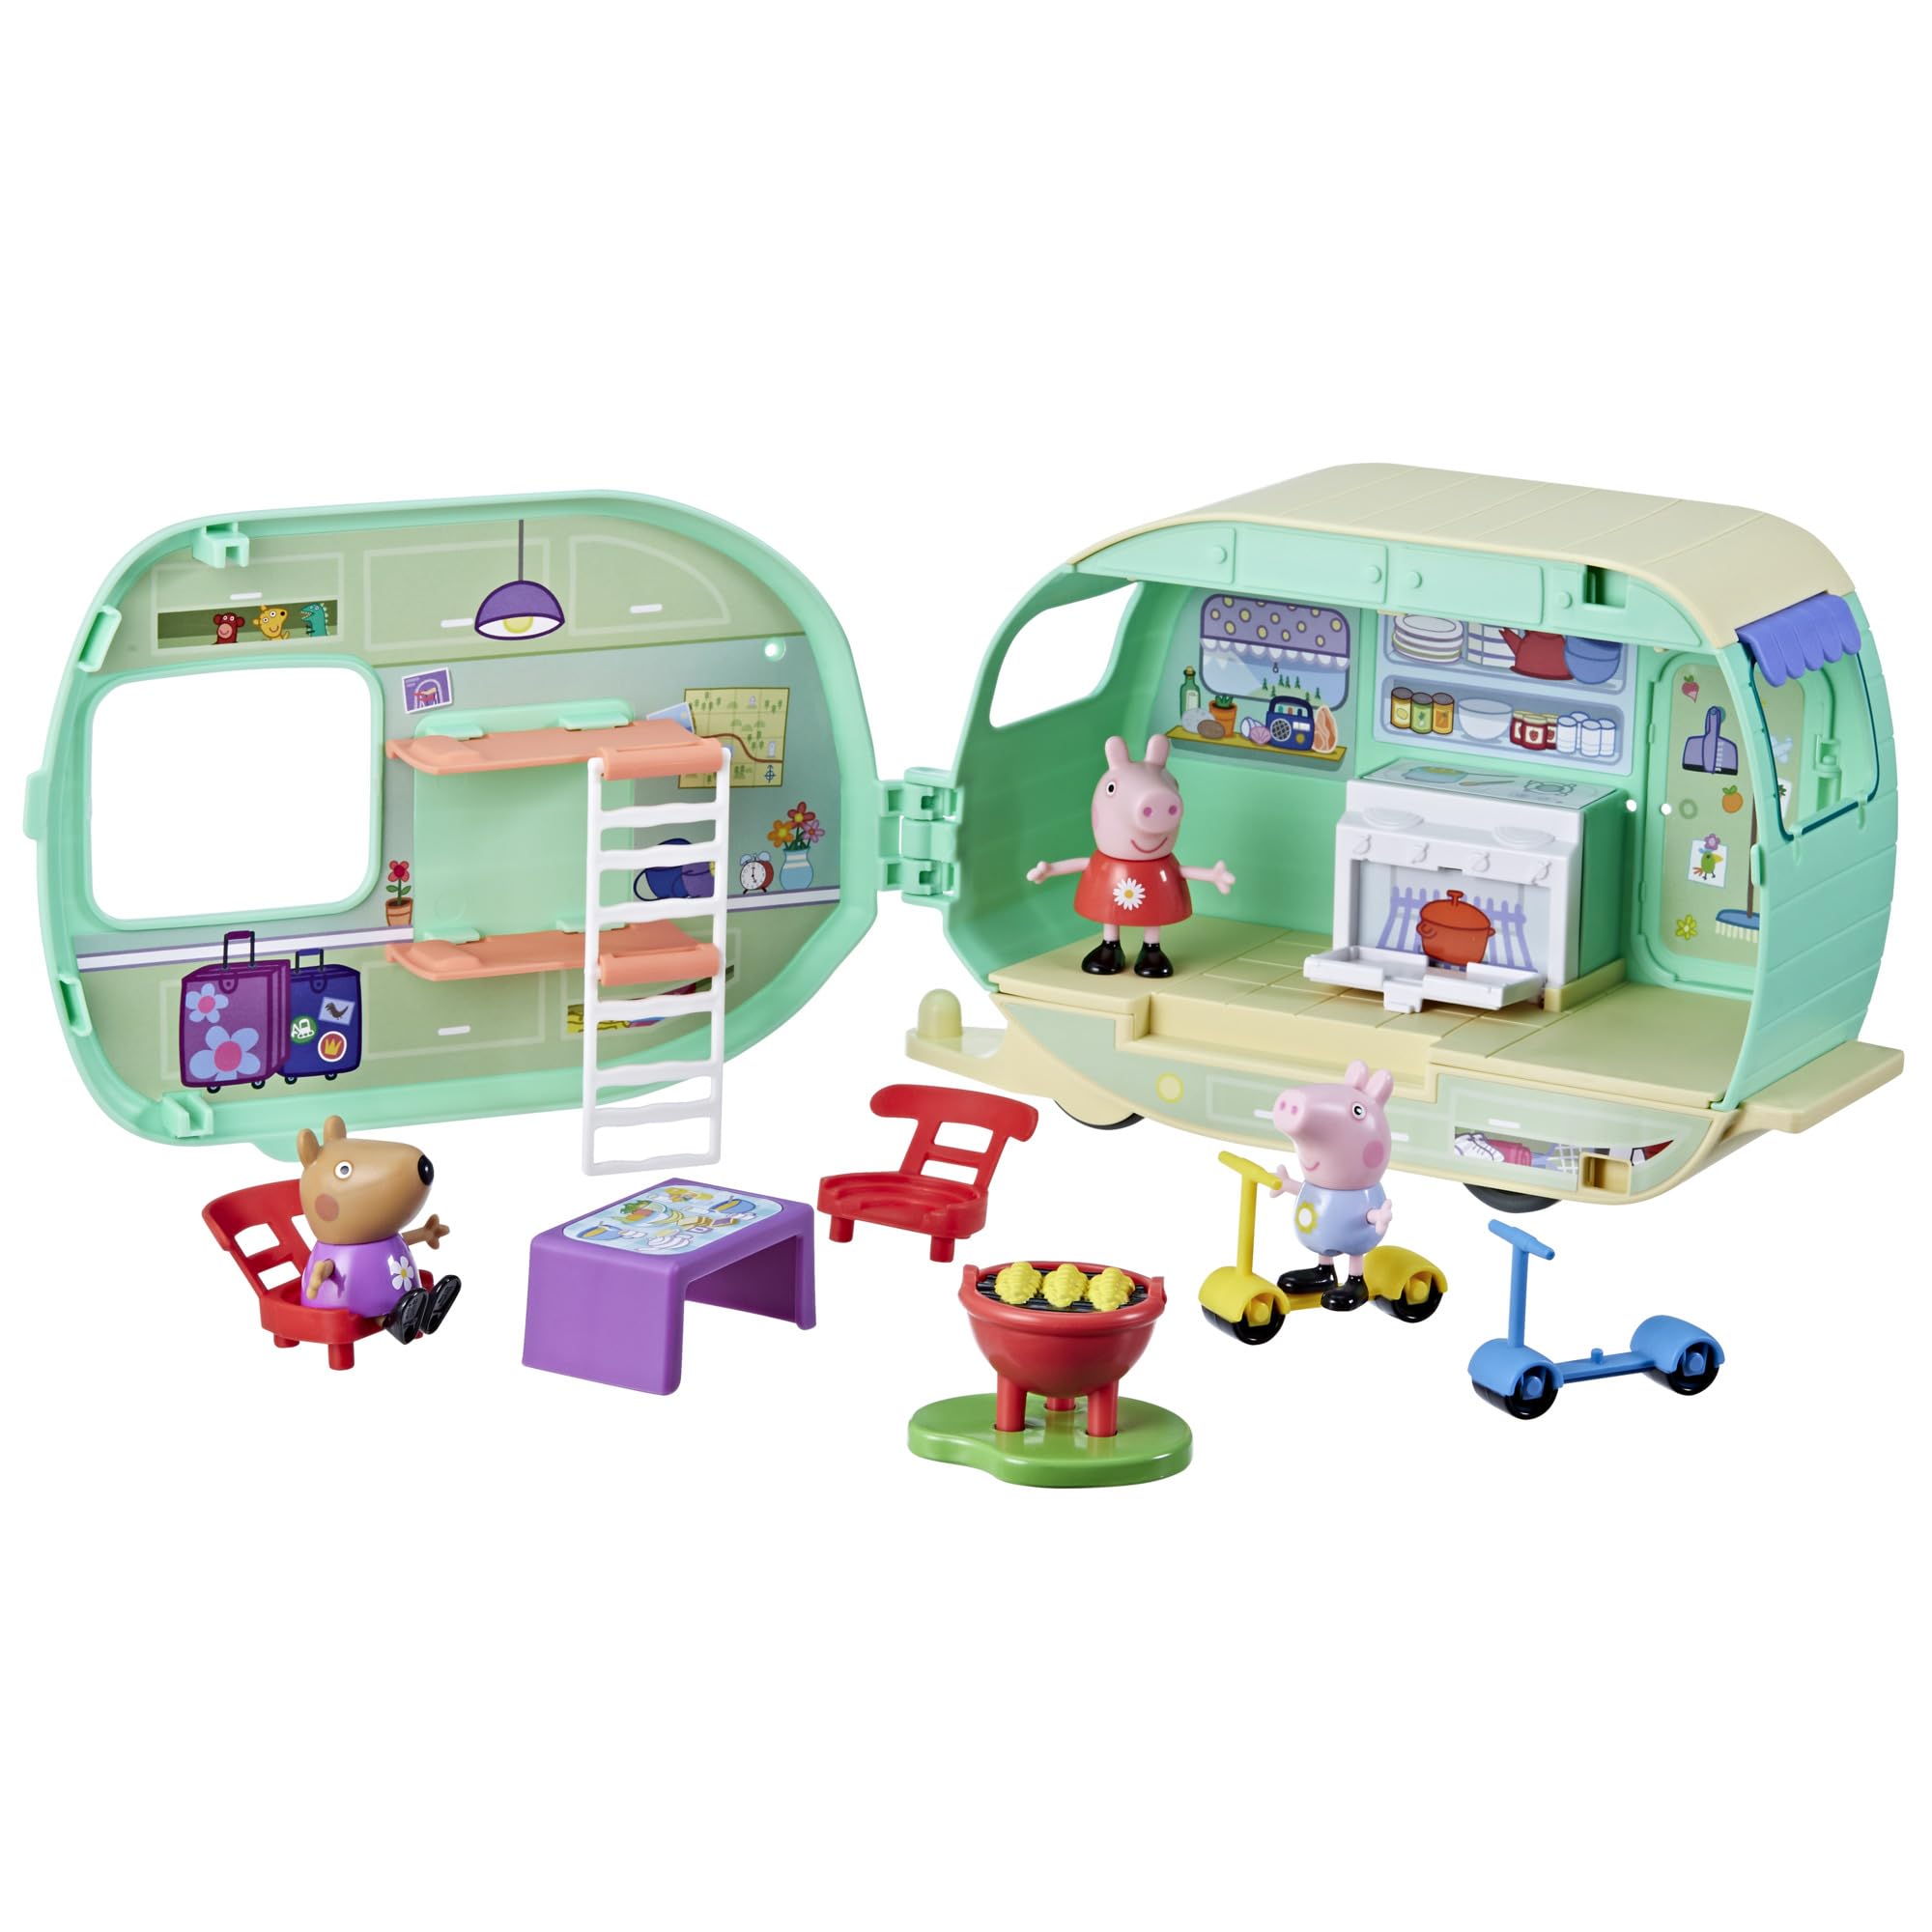 PEPPA PIG Caravan Playset with 3 Figures and 6 Accessories, Preschool Toys for 3 Year Old Girls and Boys and Up